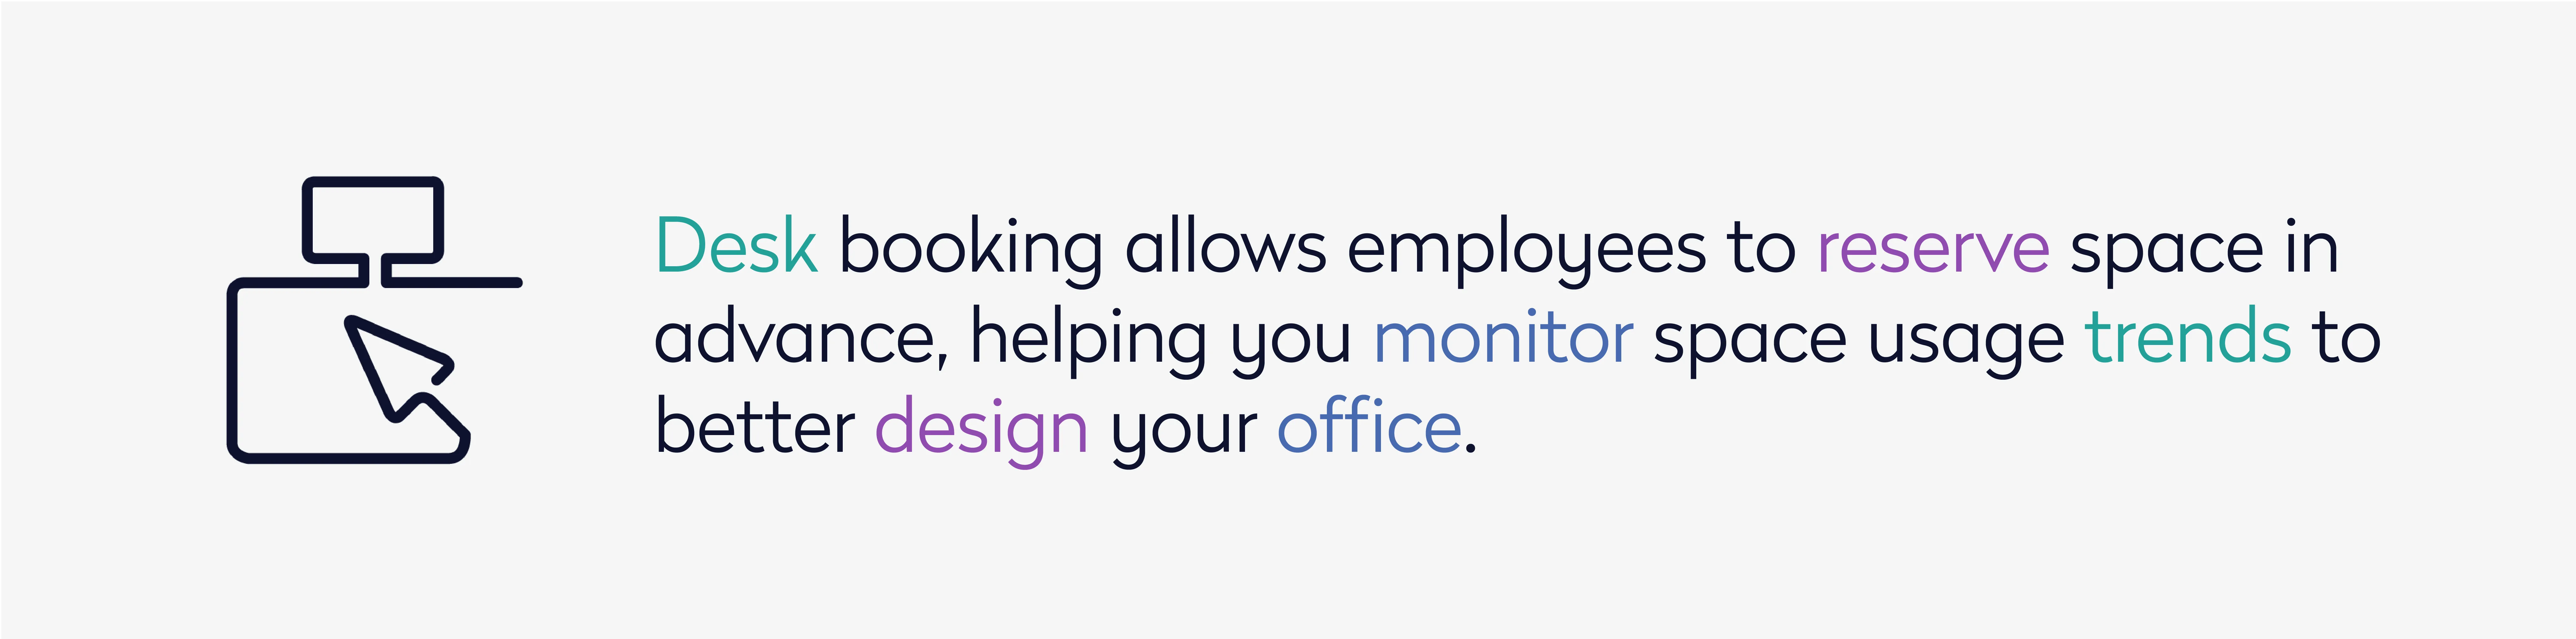 Desk booking allows employees to reserve space in advance, helping you monitor space usage trends to better design your office.